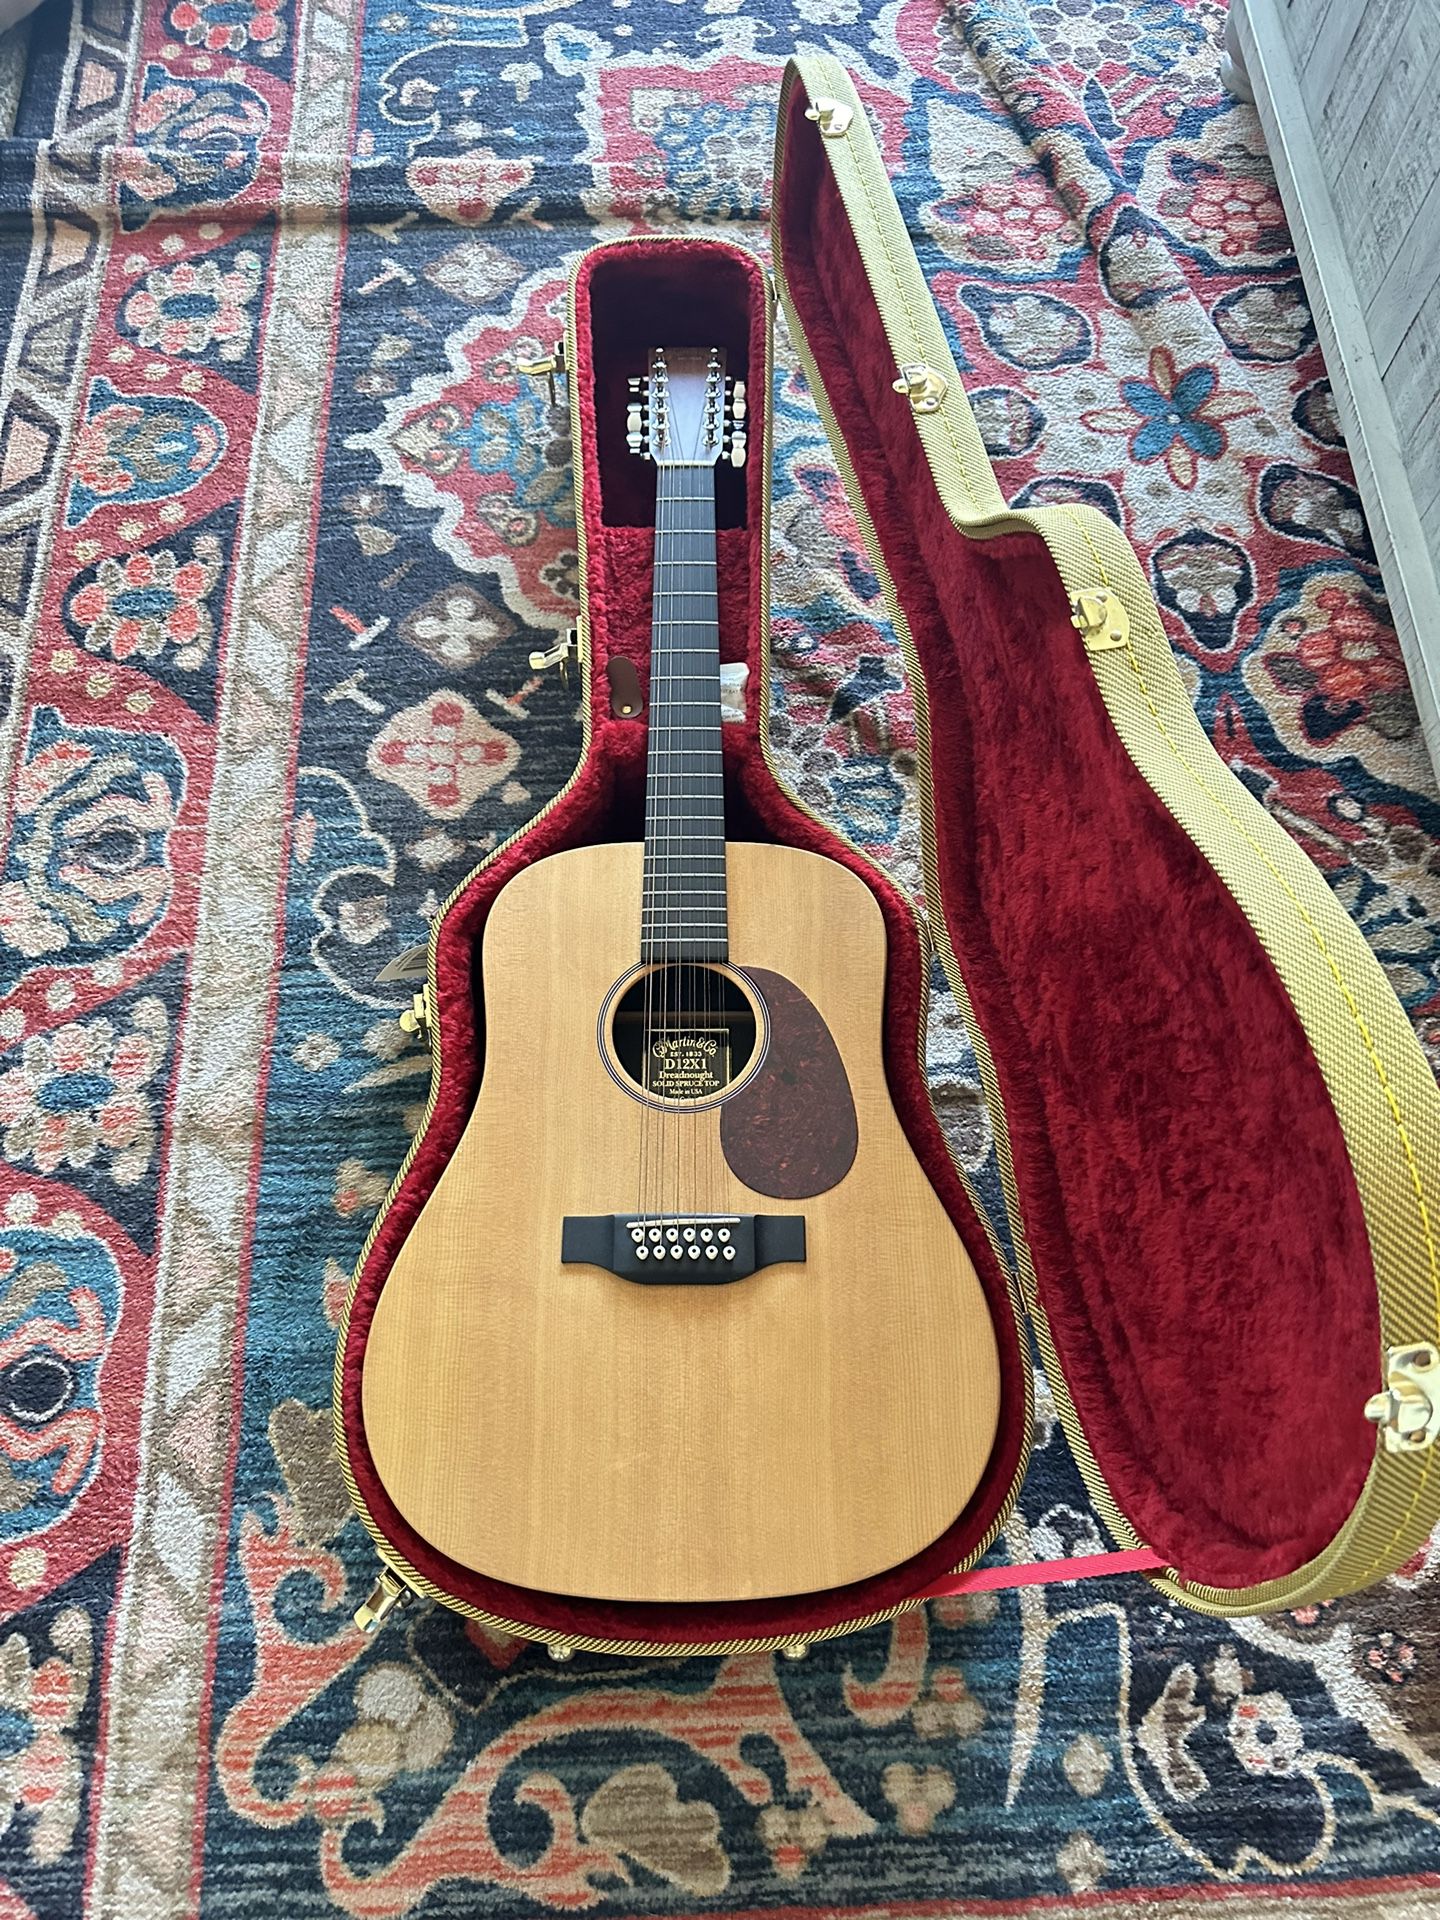 Martin 12-String Acoustic Guitar Made In The USA.